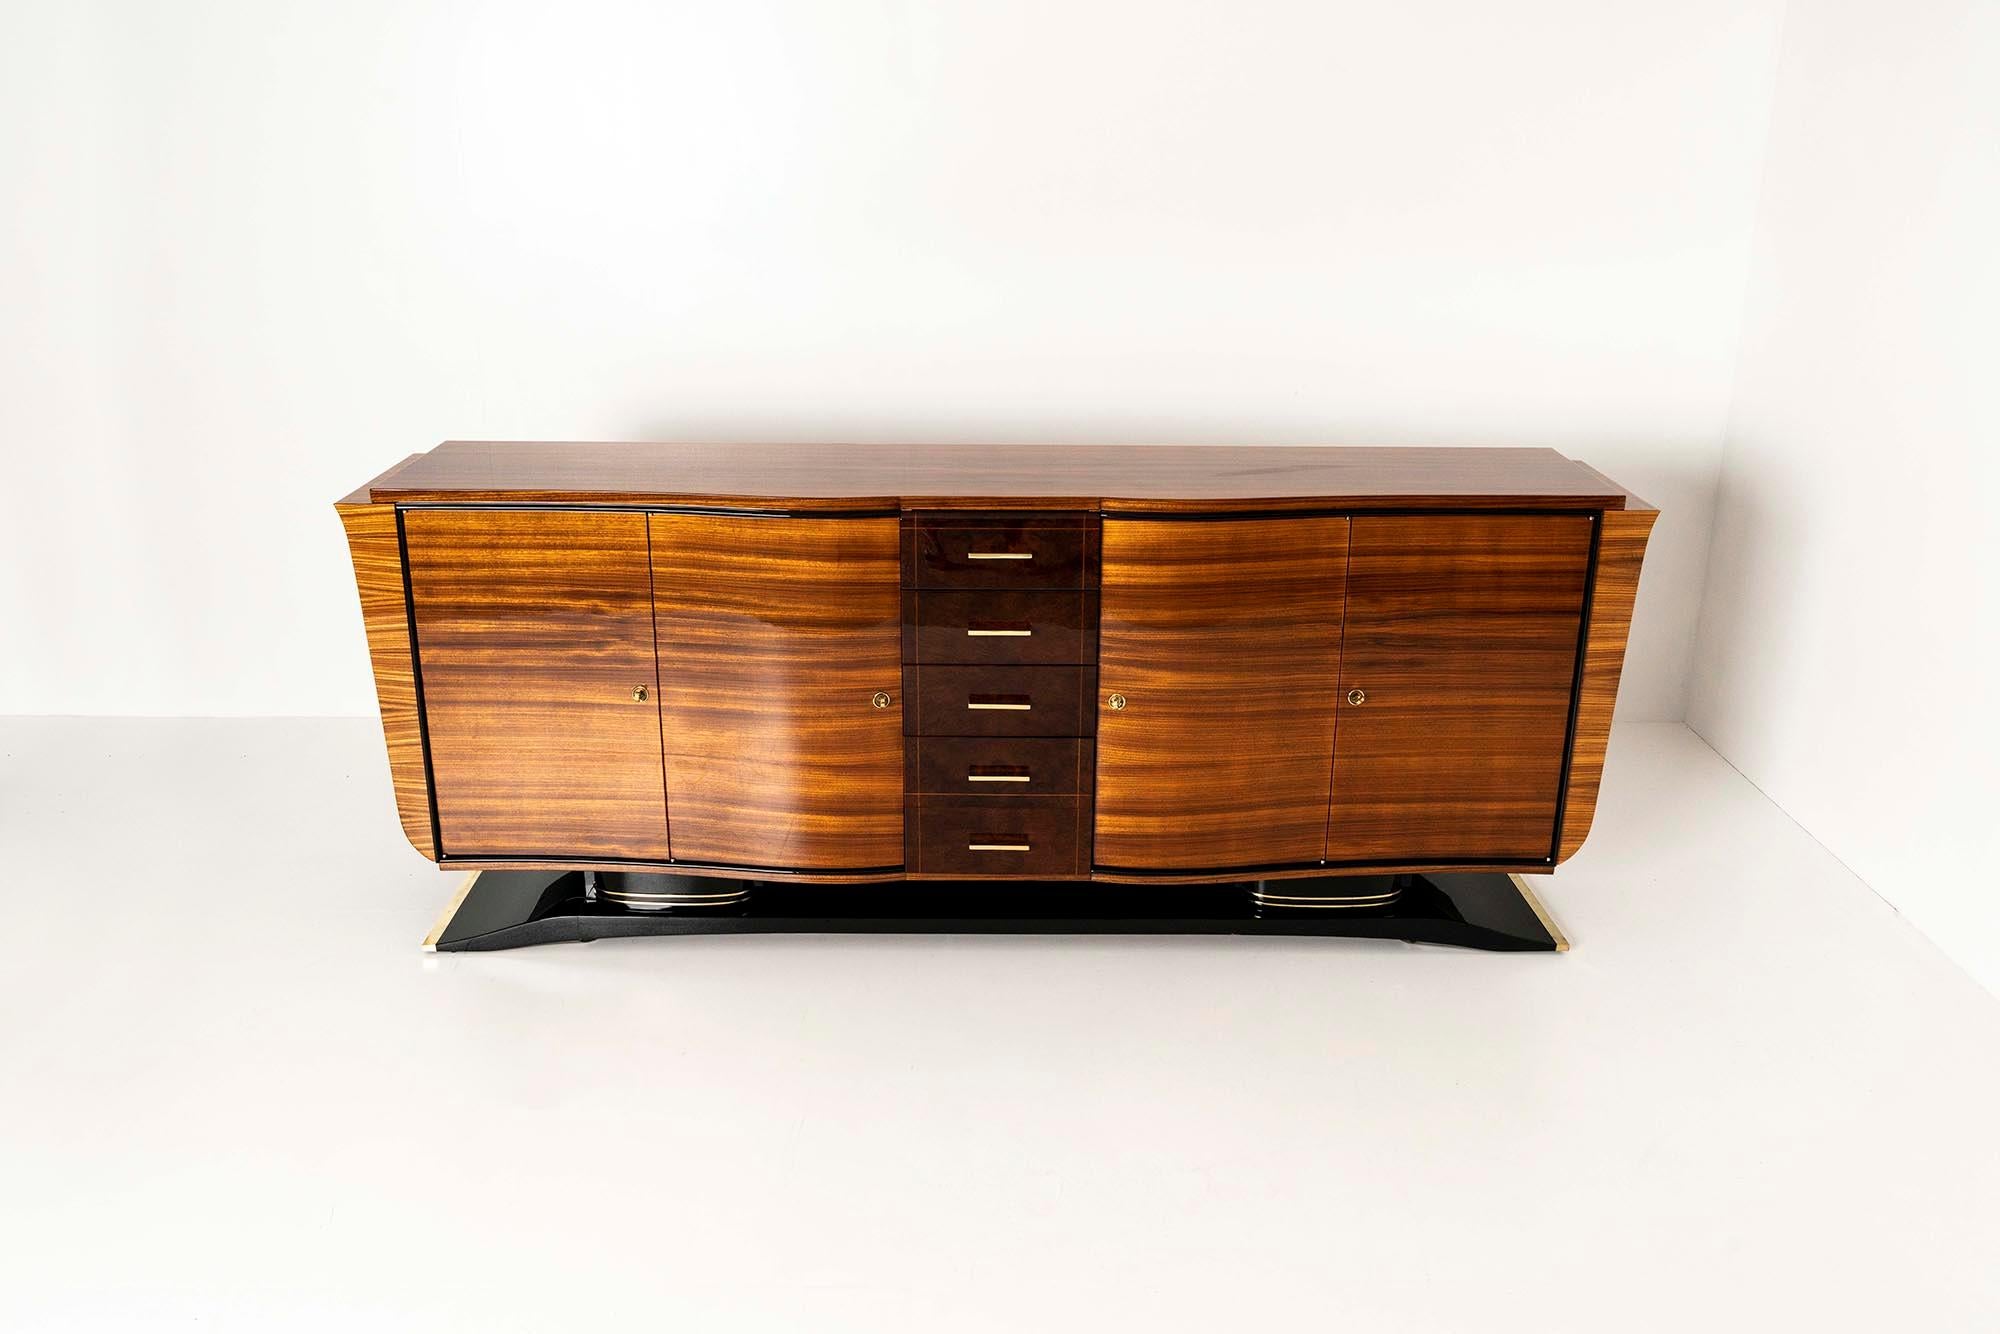 Grand Art Deco Sideboard in Rosewood Veneer with Brass Details, France, 1930s In Good Condition For Sale In Hellouw, NL